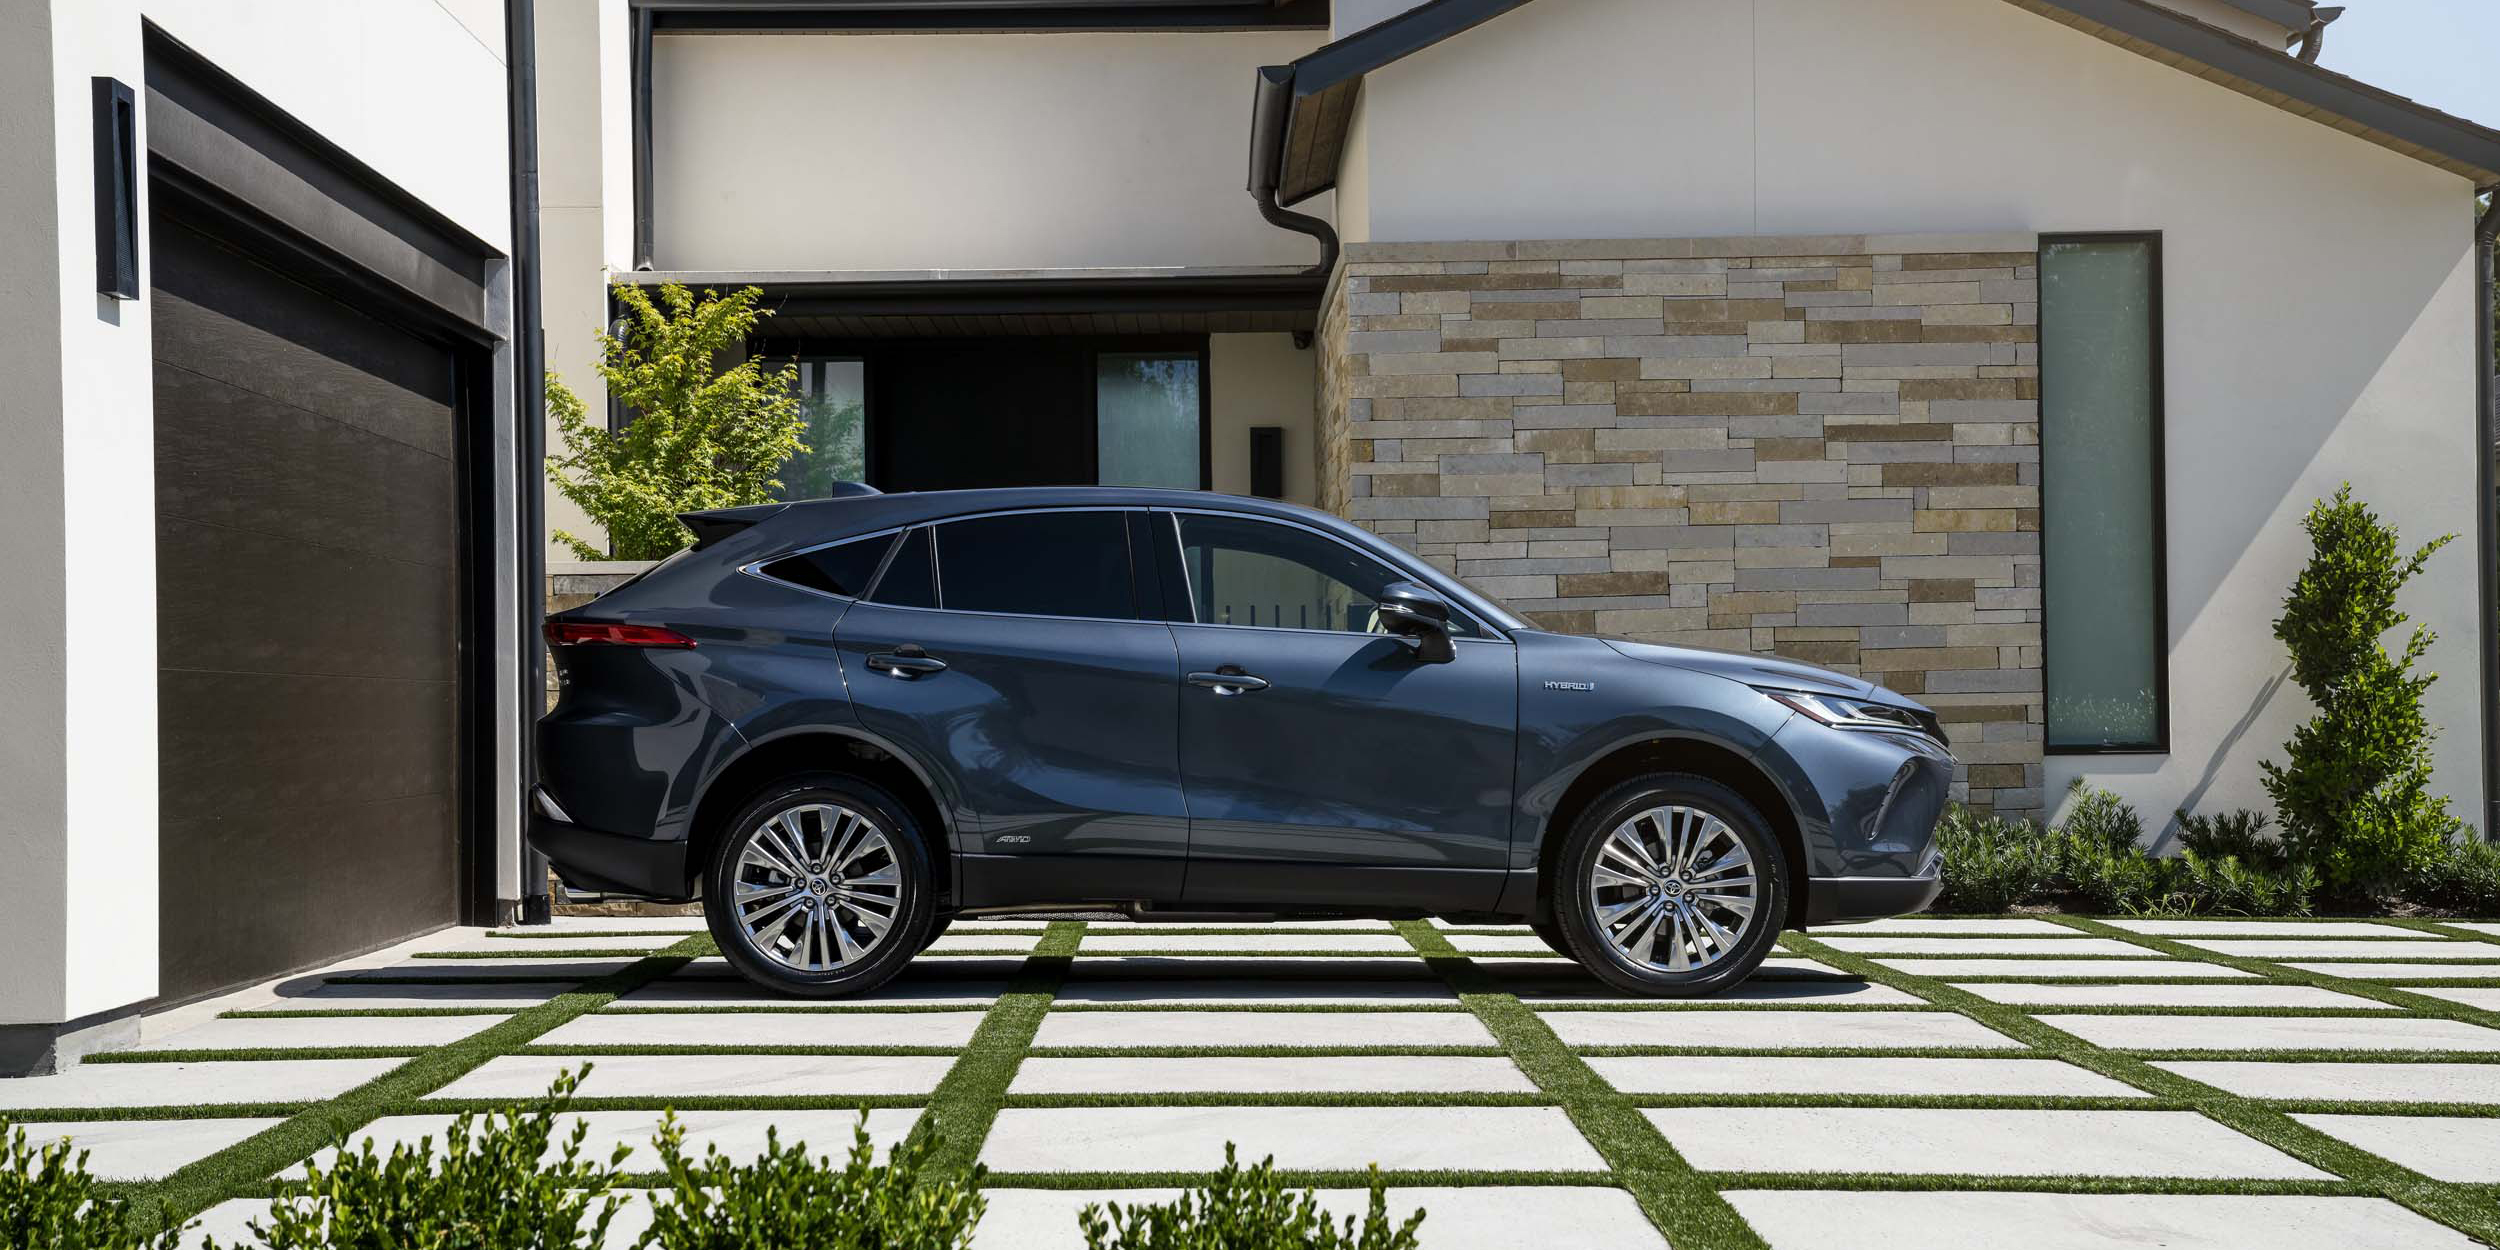 ELEVATED DRIVING EXPERIENCE COMES STANDARD IN THE ALL-NEW 2021 VENZA